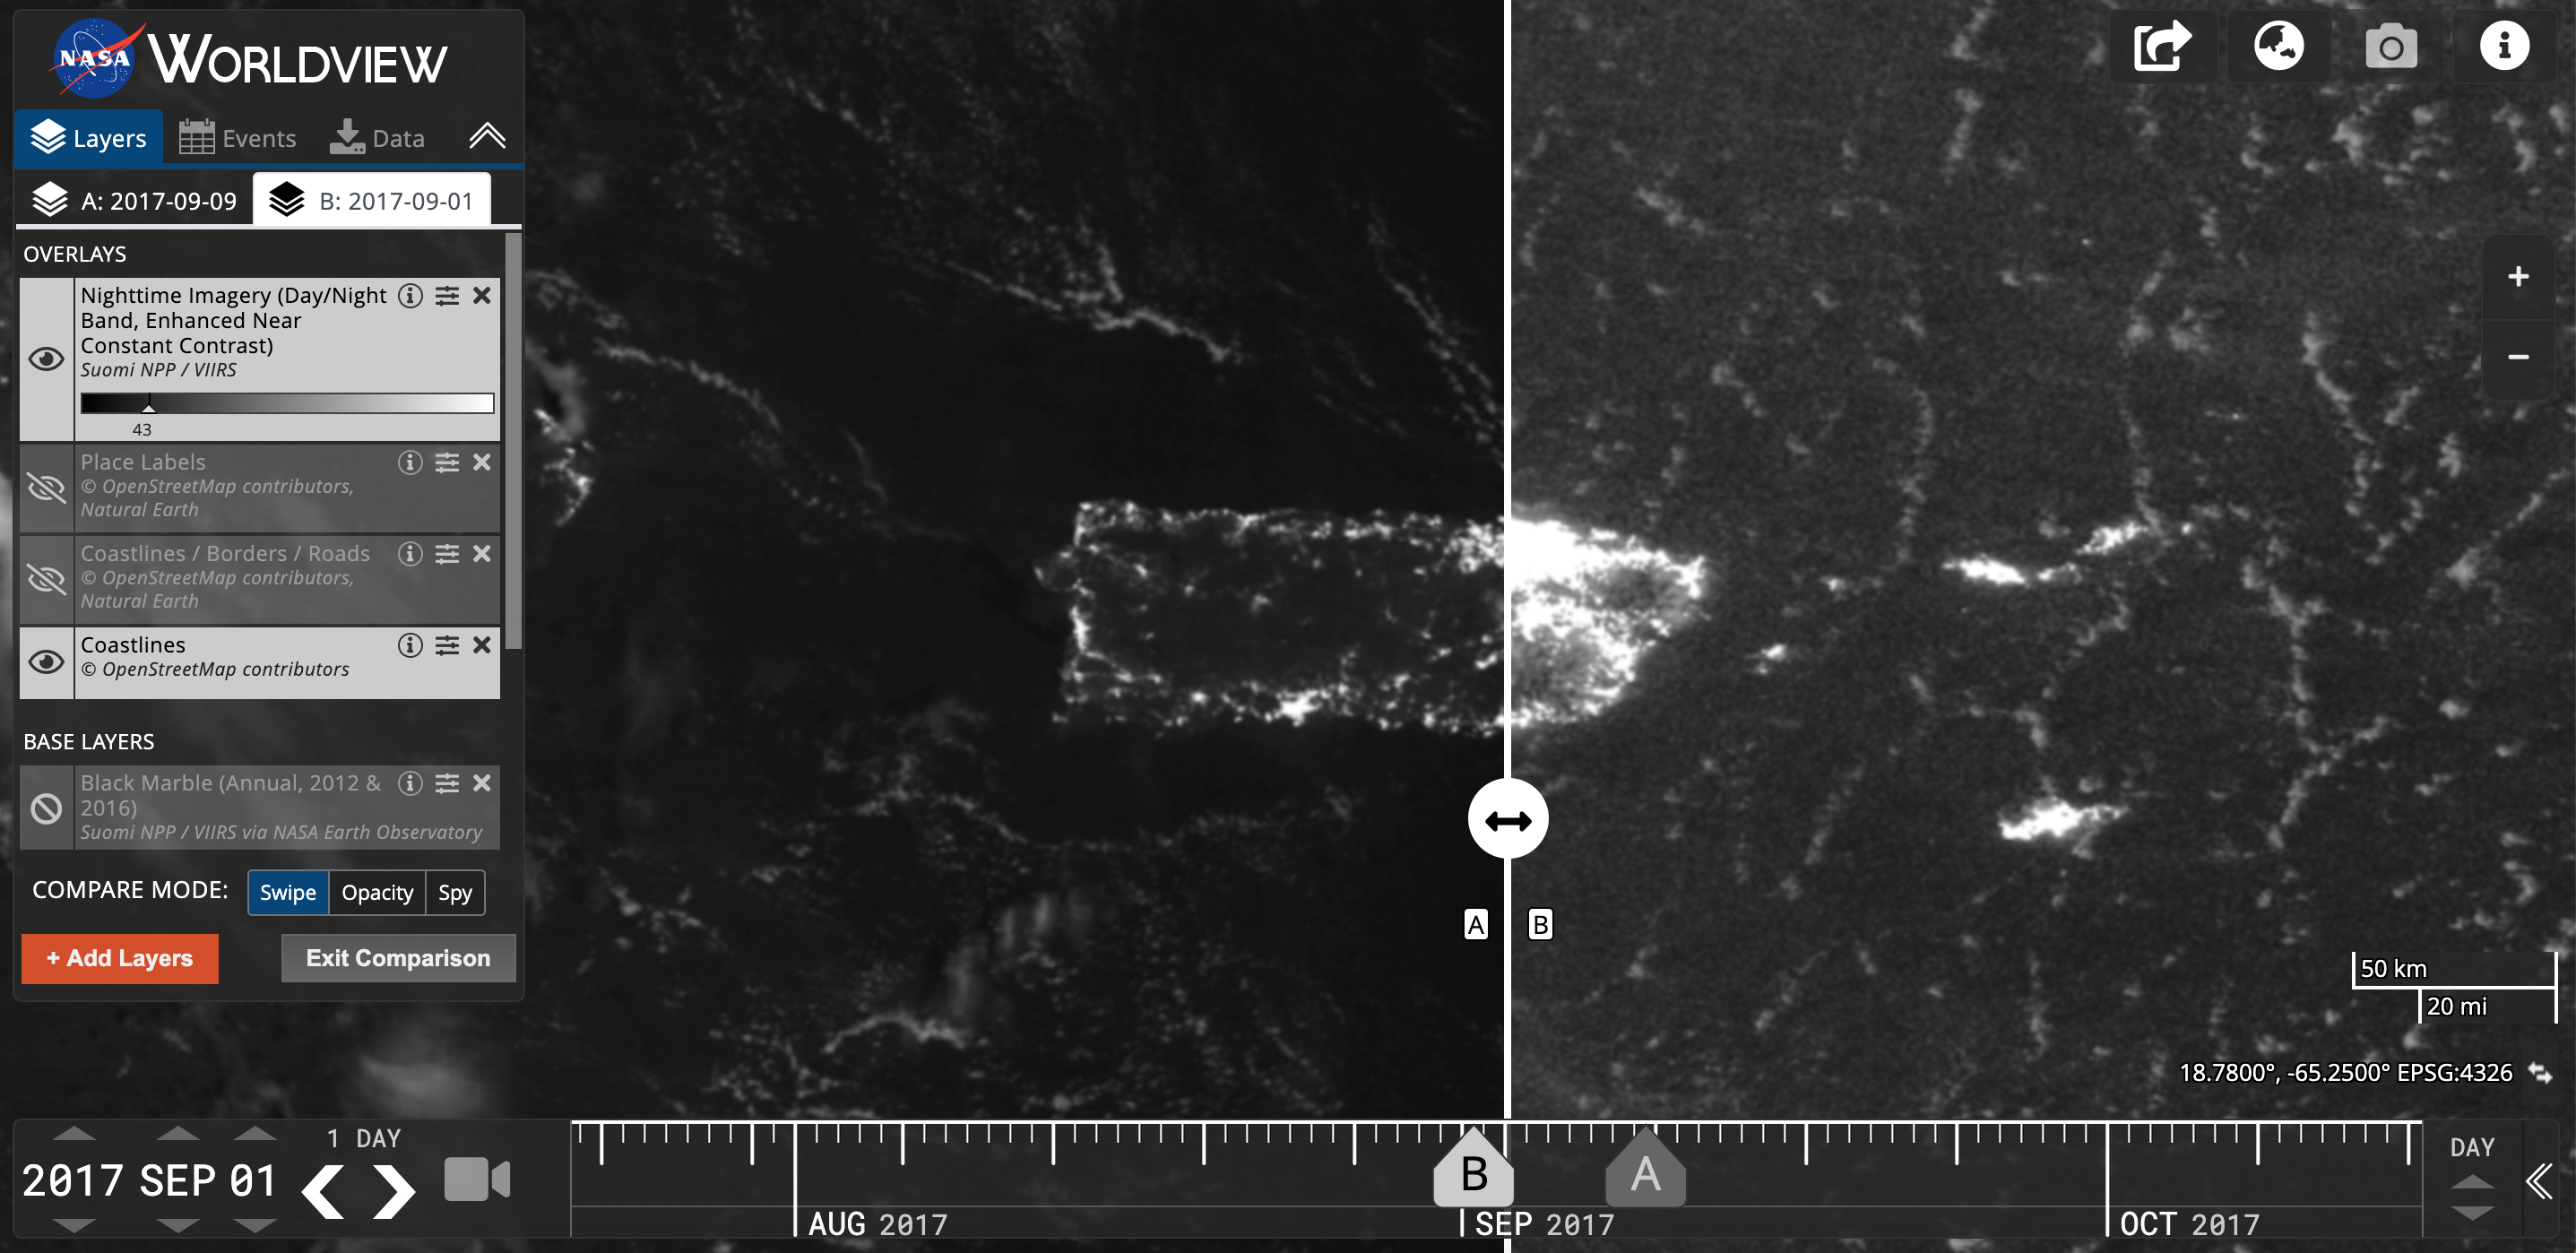 Worldview data visualization of the nighttime lights in Puerto Rico pre- and post- Hurricane Maria, which made landfall on September 20, 2017. Post-hurricane image shows widespread outages around San Juan, including key hospital and transportation infrastructure.